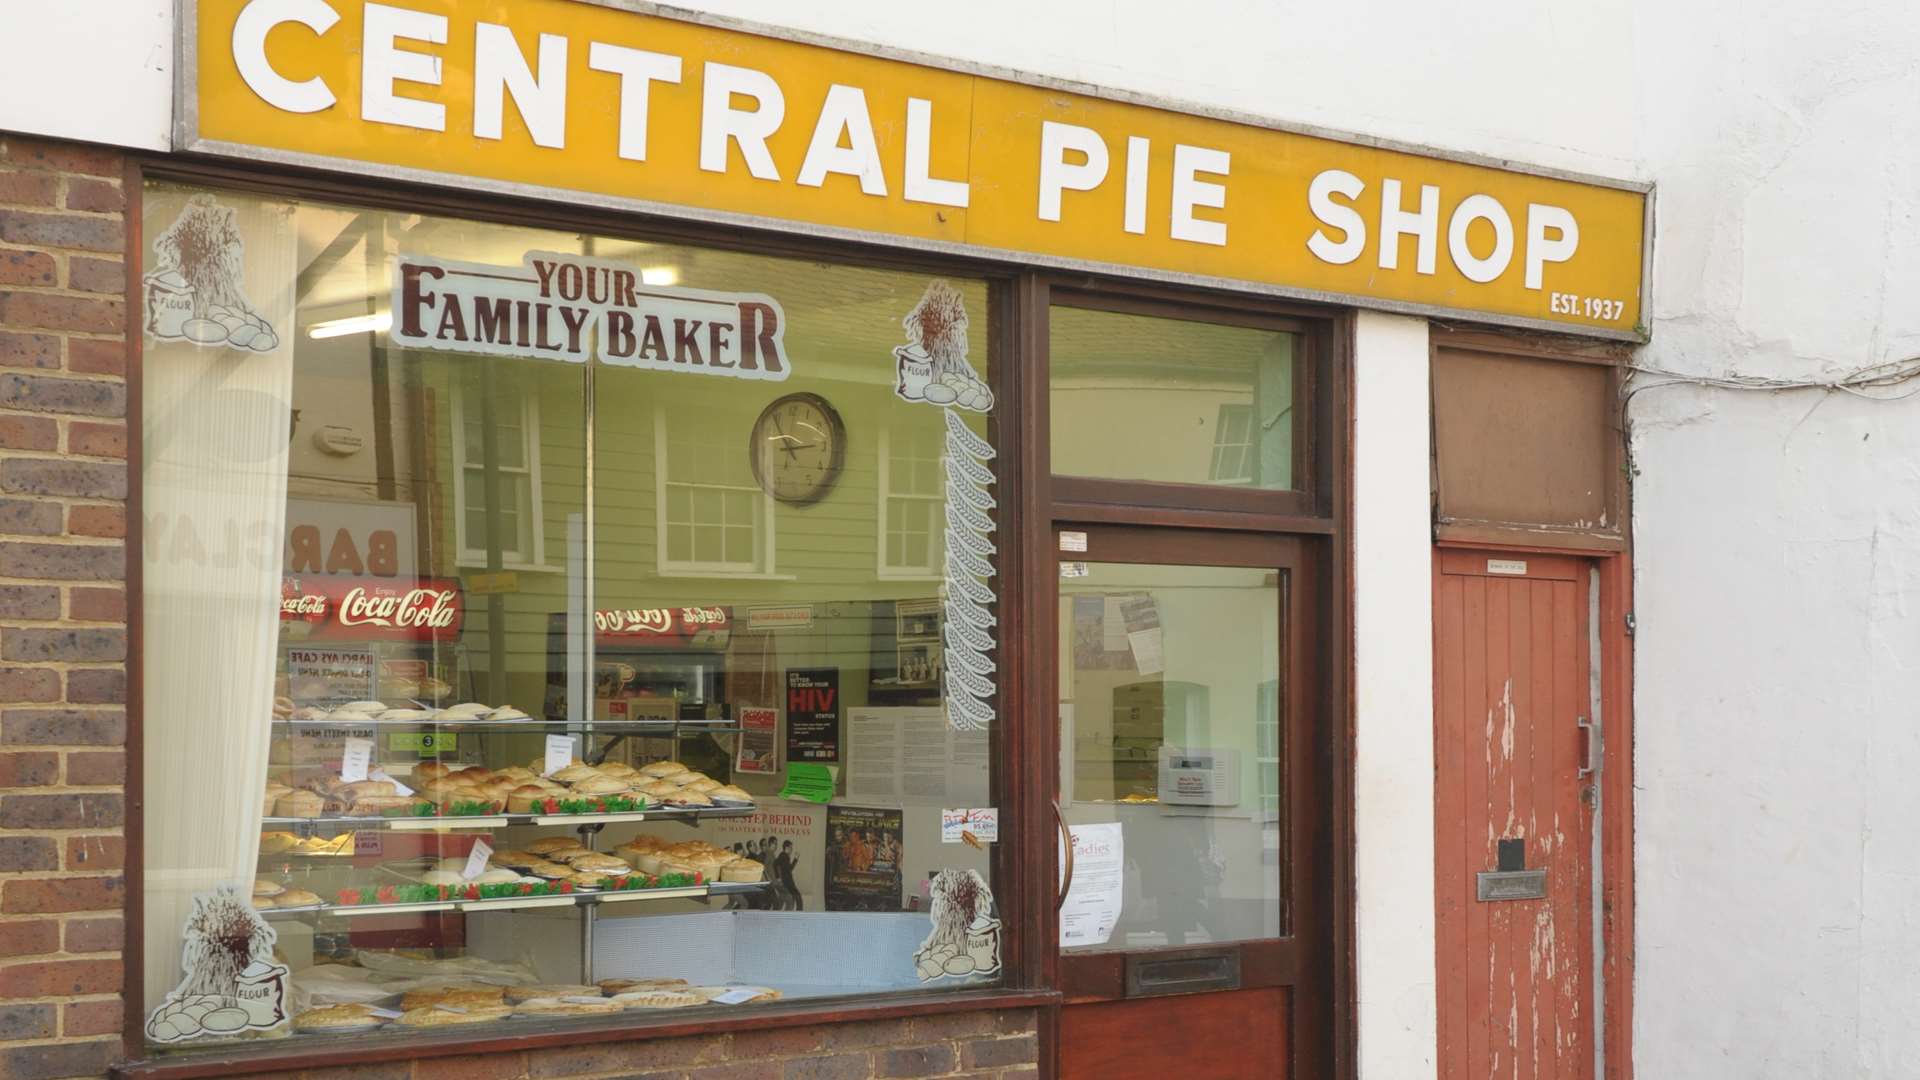 The Central Pie Shop in East Street